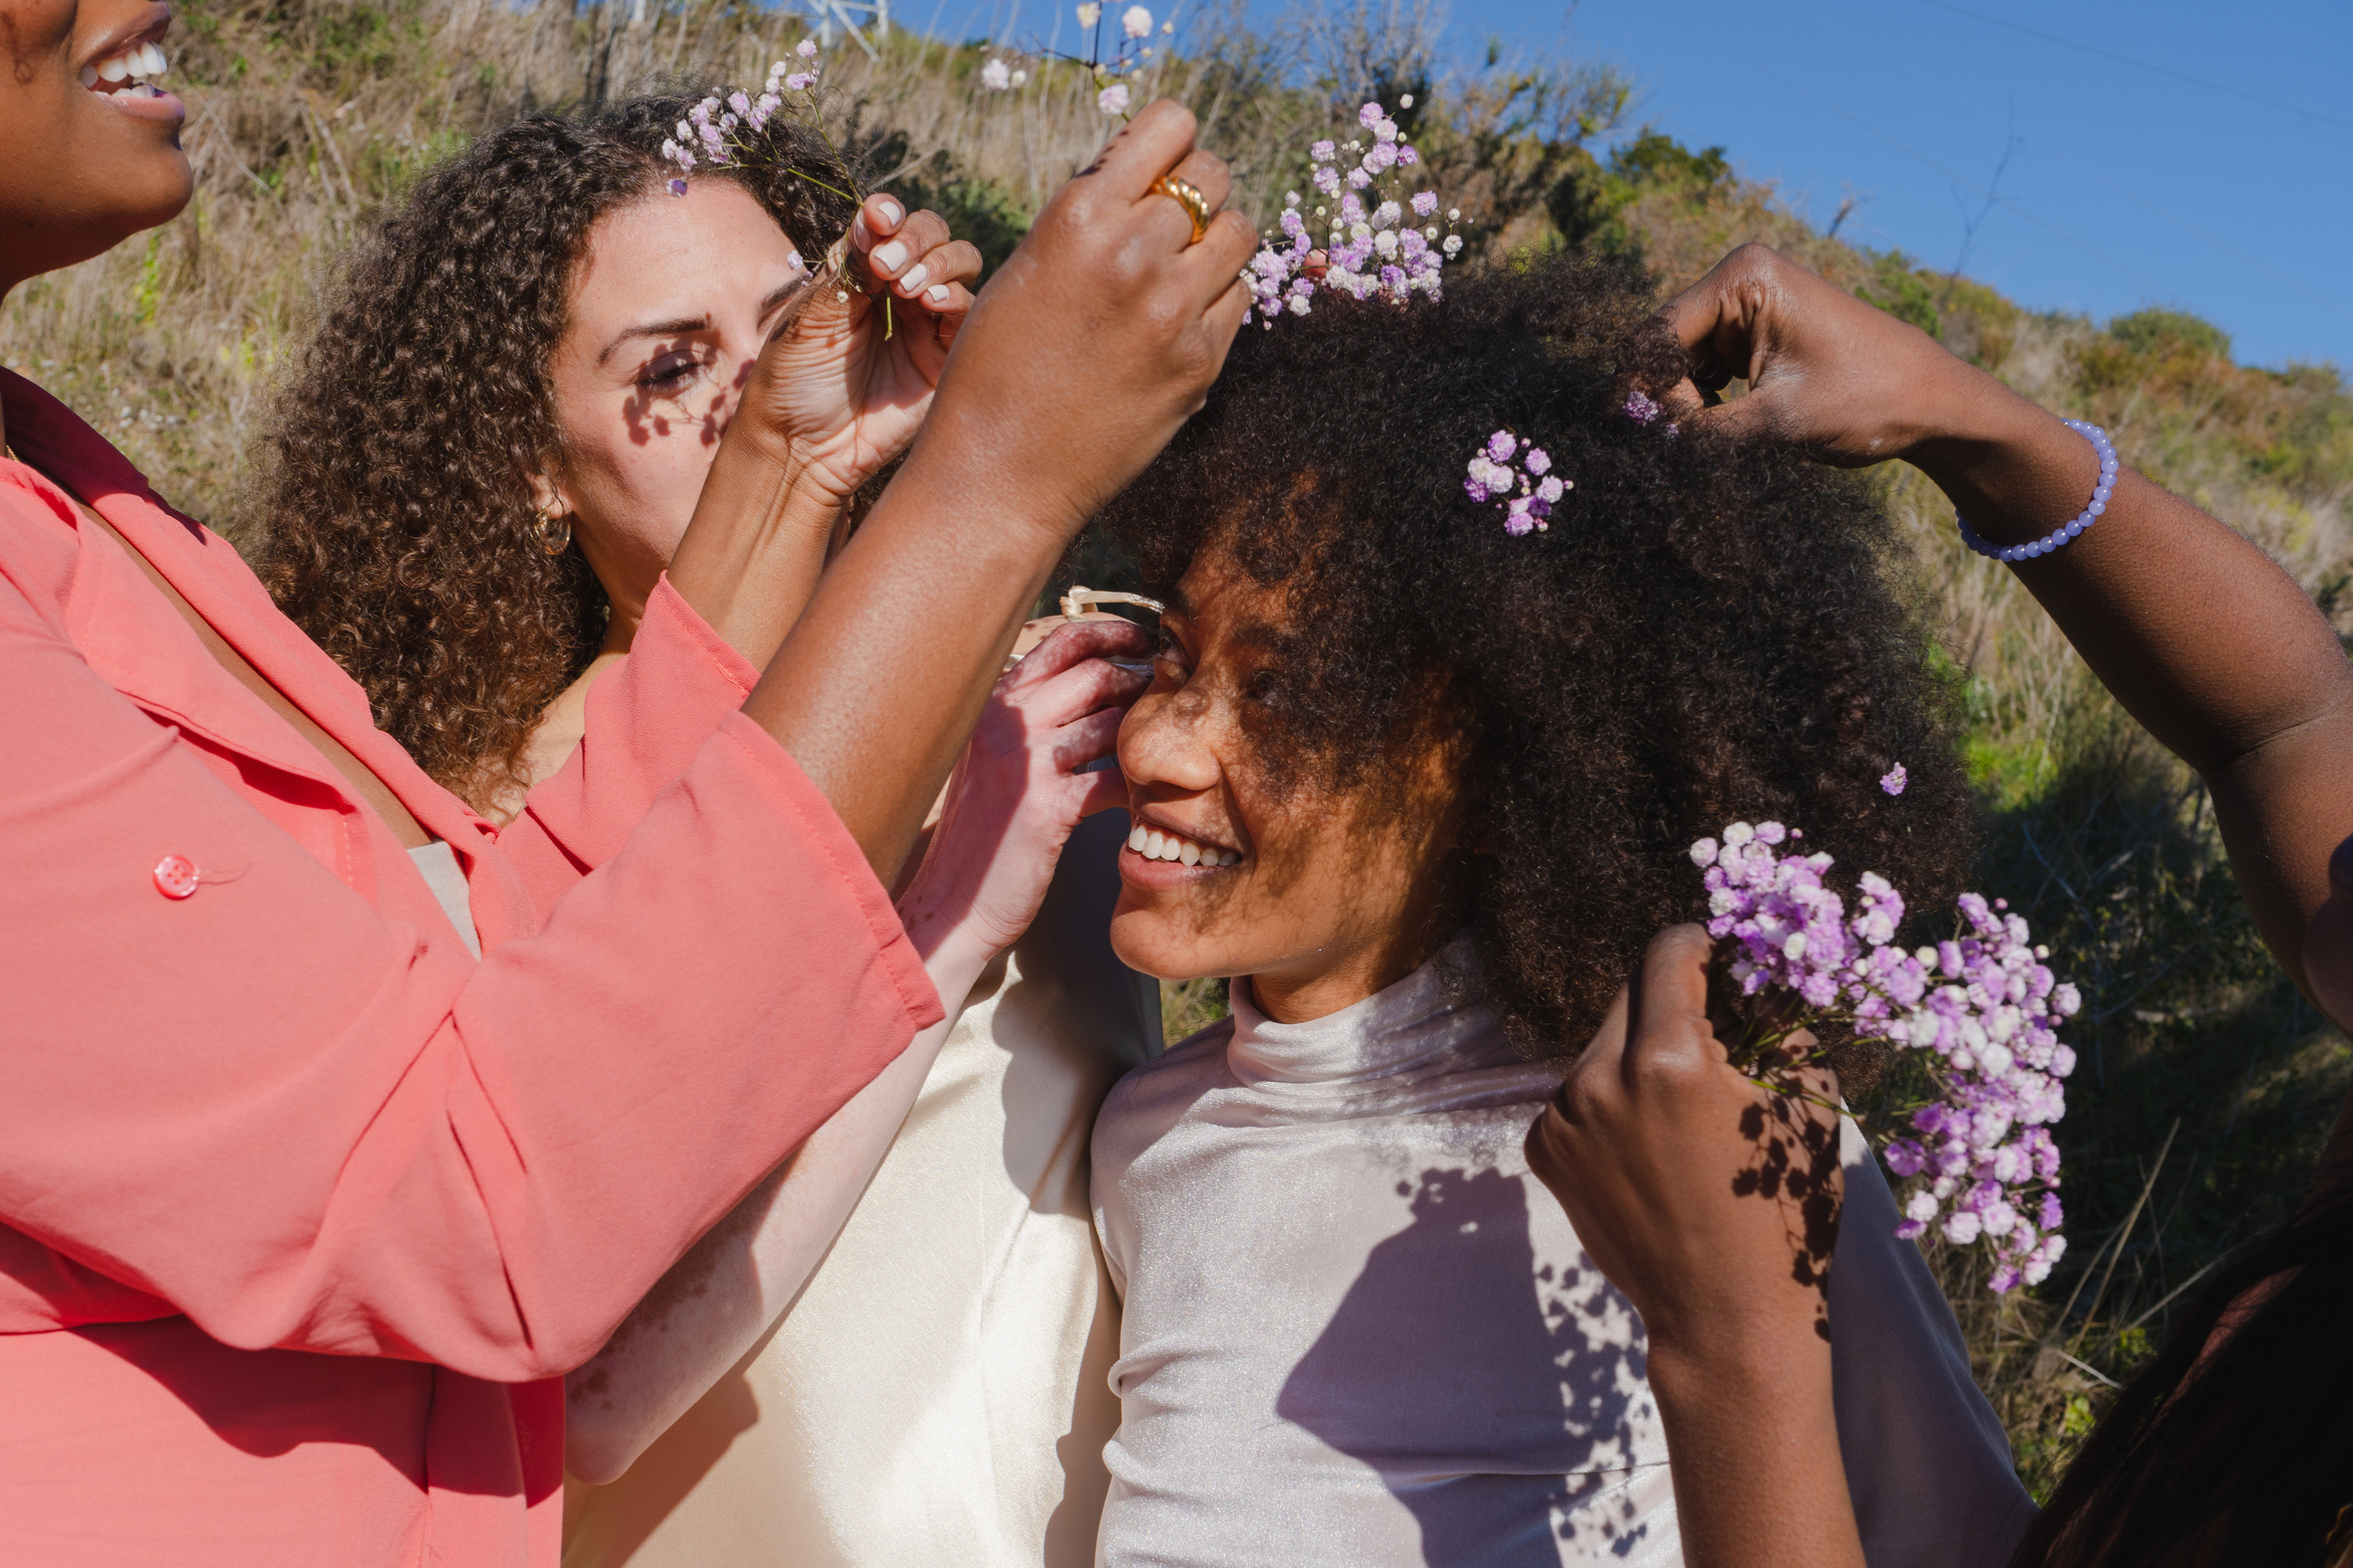 Women Putting Flowers in Woman's Curly Hair